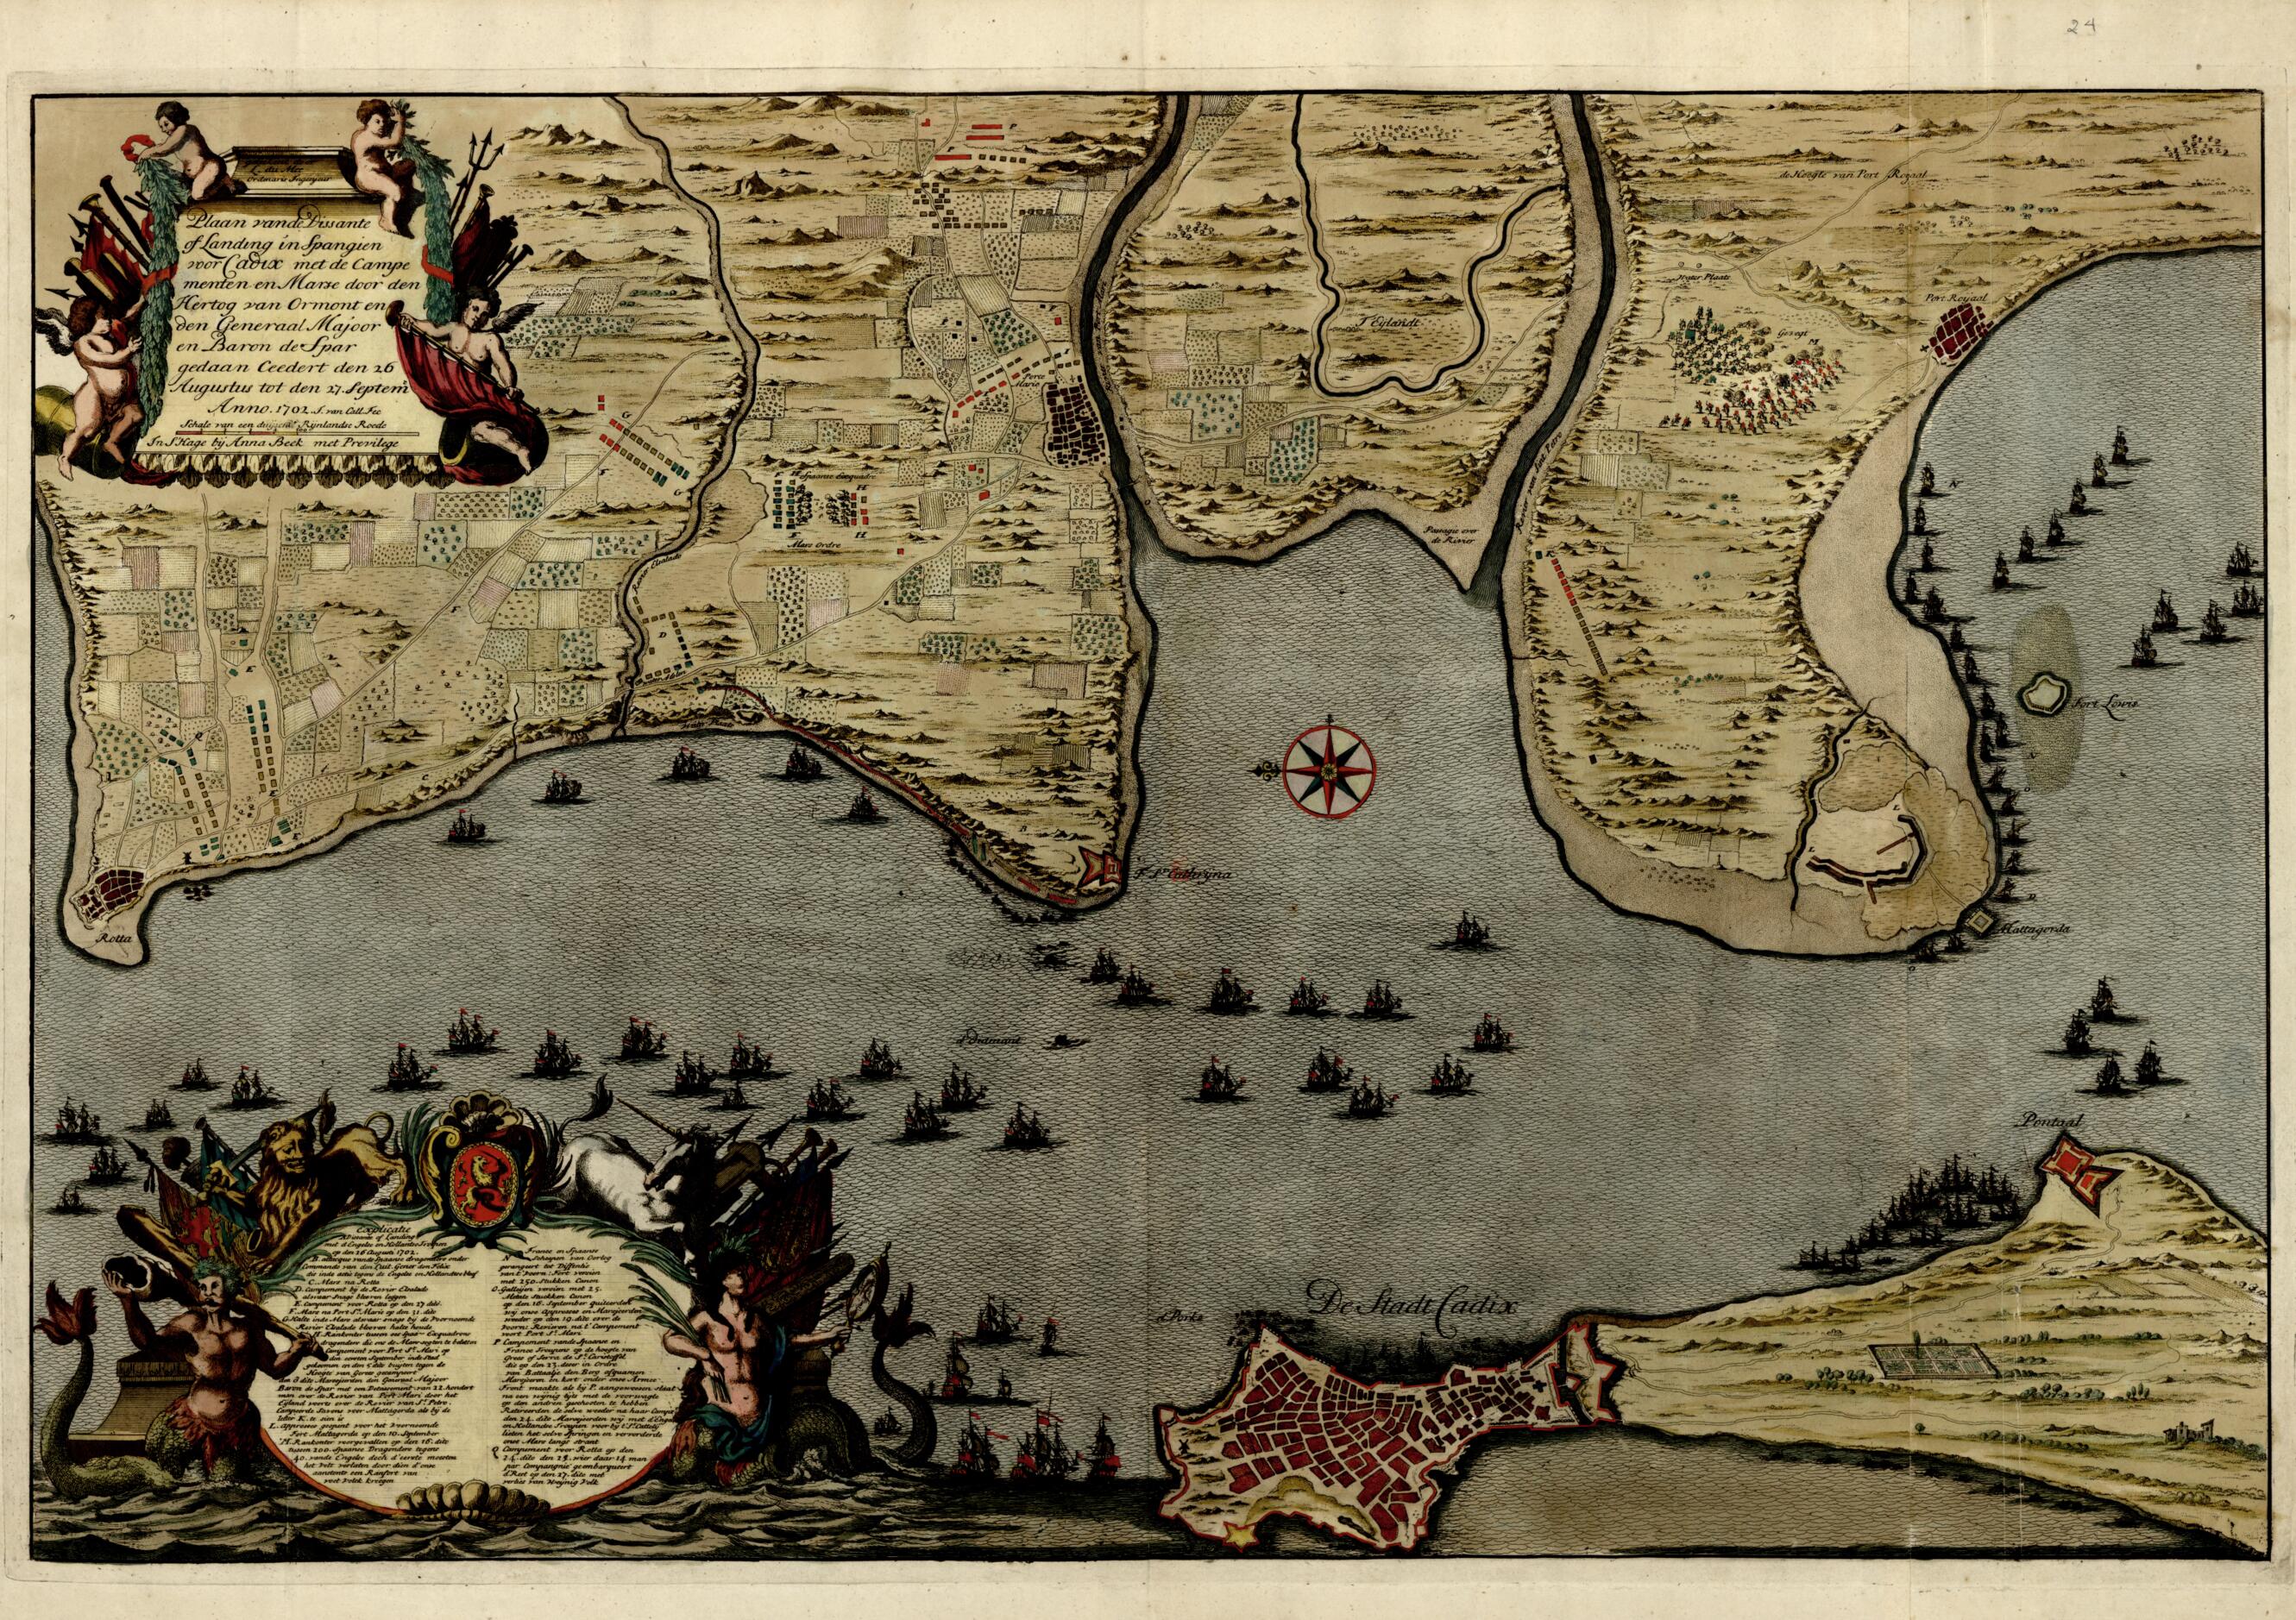 This old map of Geteekent from a Collection of Plans of Fortifications and Battles, 1684-from 1709 from 1709 was created by Anna Beeck in 1709